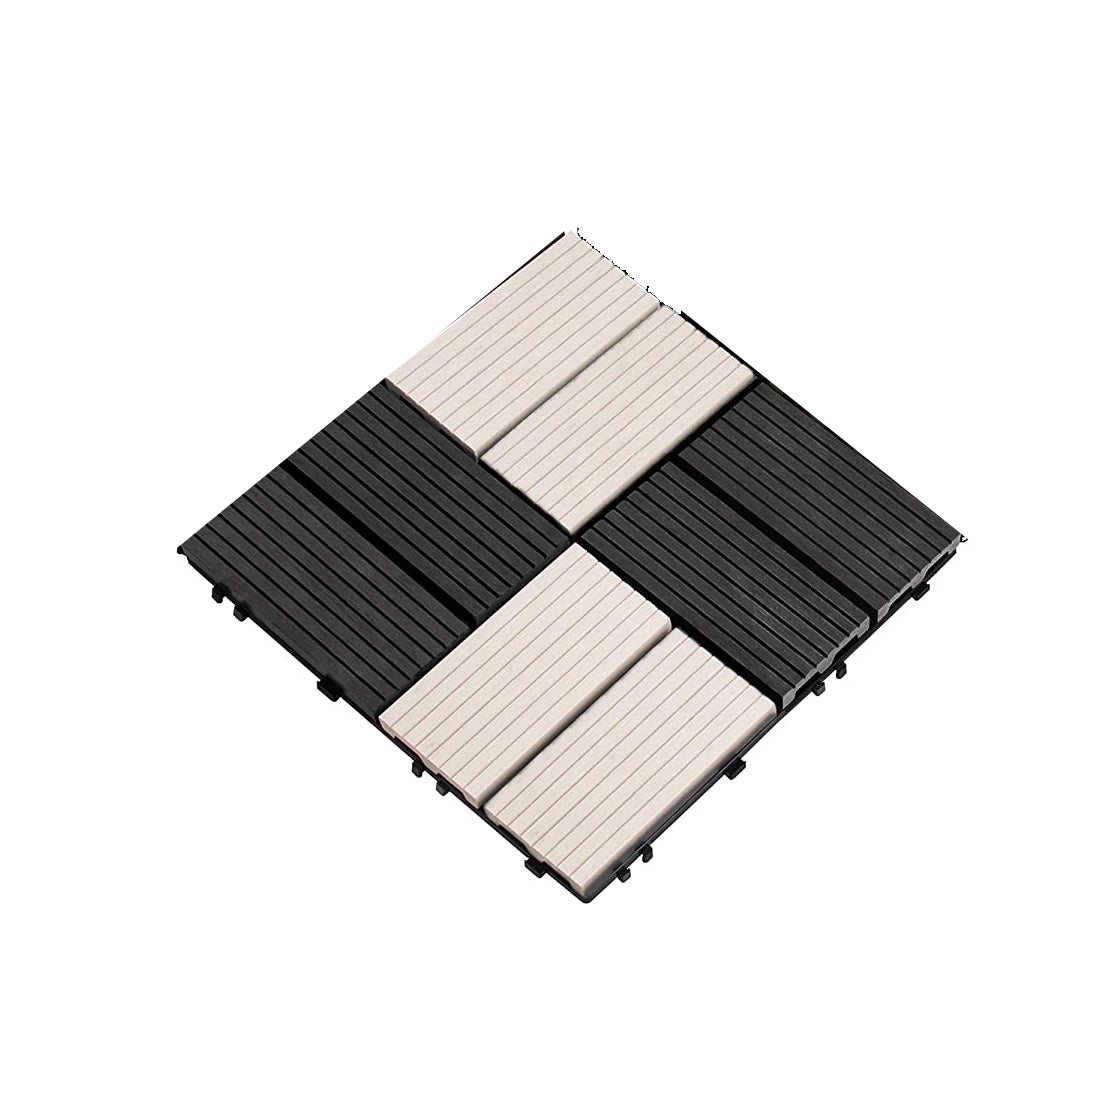 12''x12'' Wood Composite Deck Tiles -Black White Square (Pack of 10)